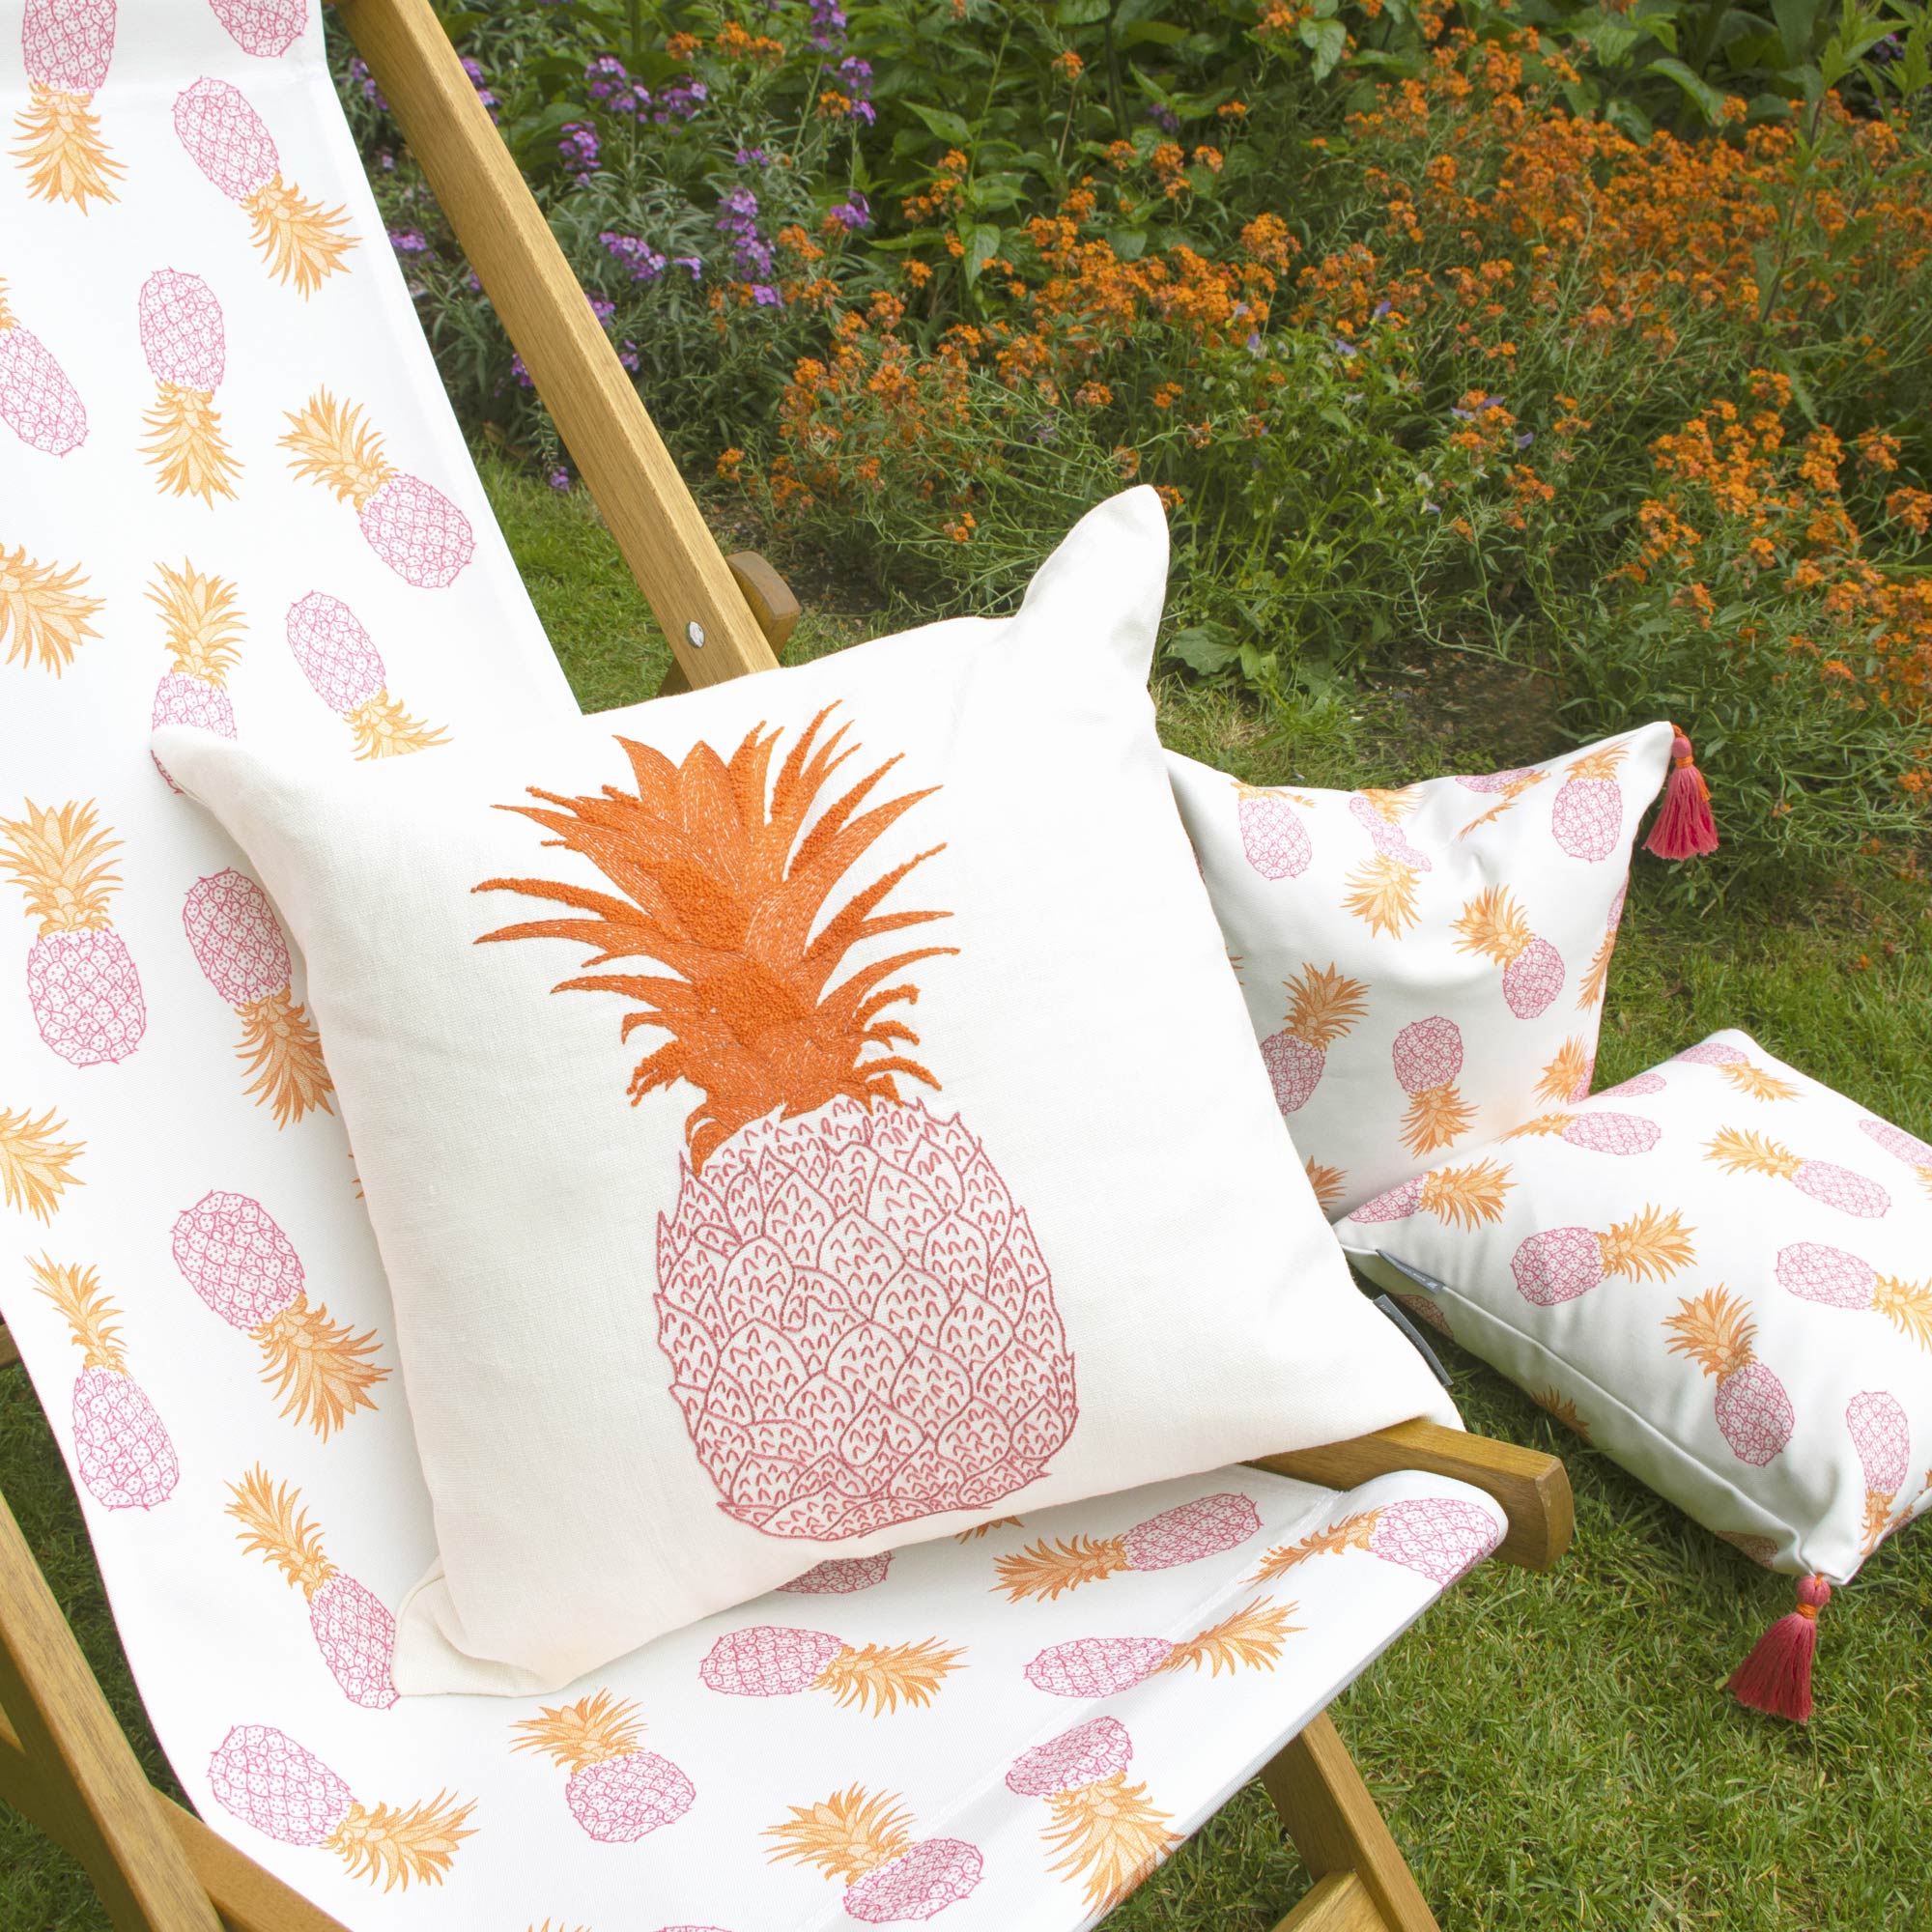 Pineapple Hand-Embroidered Cushion on Deckchair Pink and Orange on Cream Melissa Wyndham for Fine Cell Work